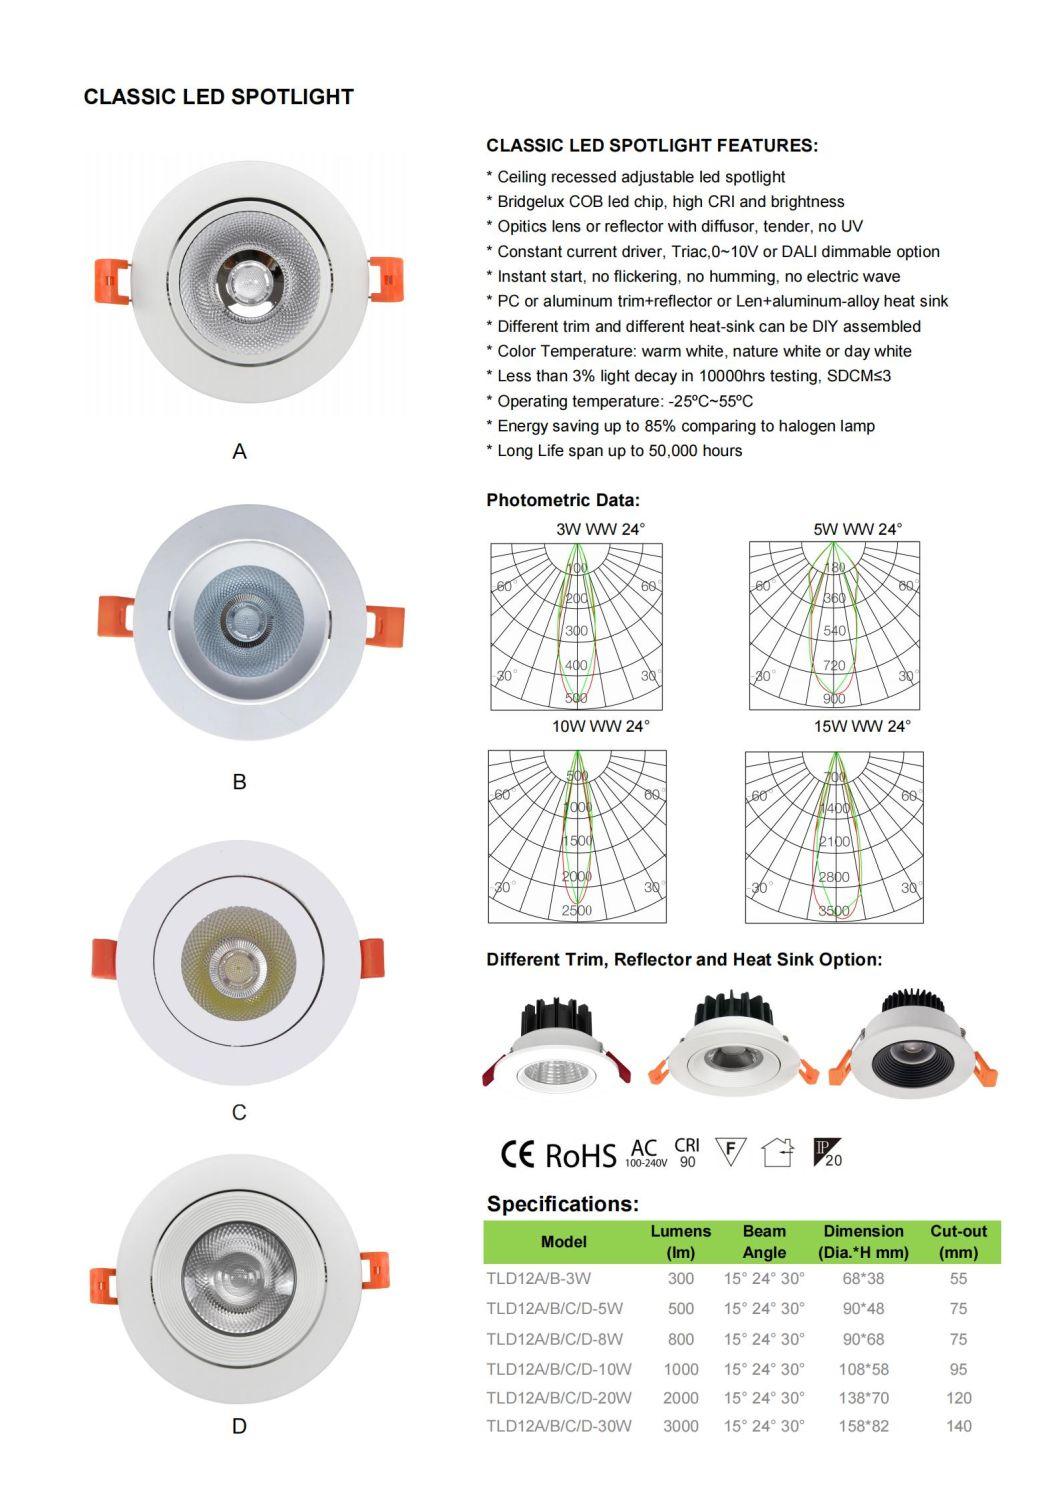 8W-12W Classic Ecolighting Europe Ceiling Recessed Adjustable LED Down Spotlight for Commercial Project Office Hotel Apartment Residential Corridor Rooms